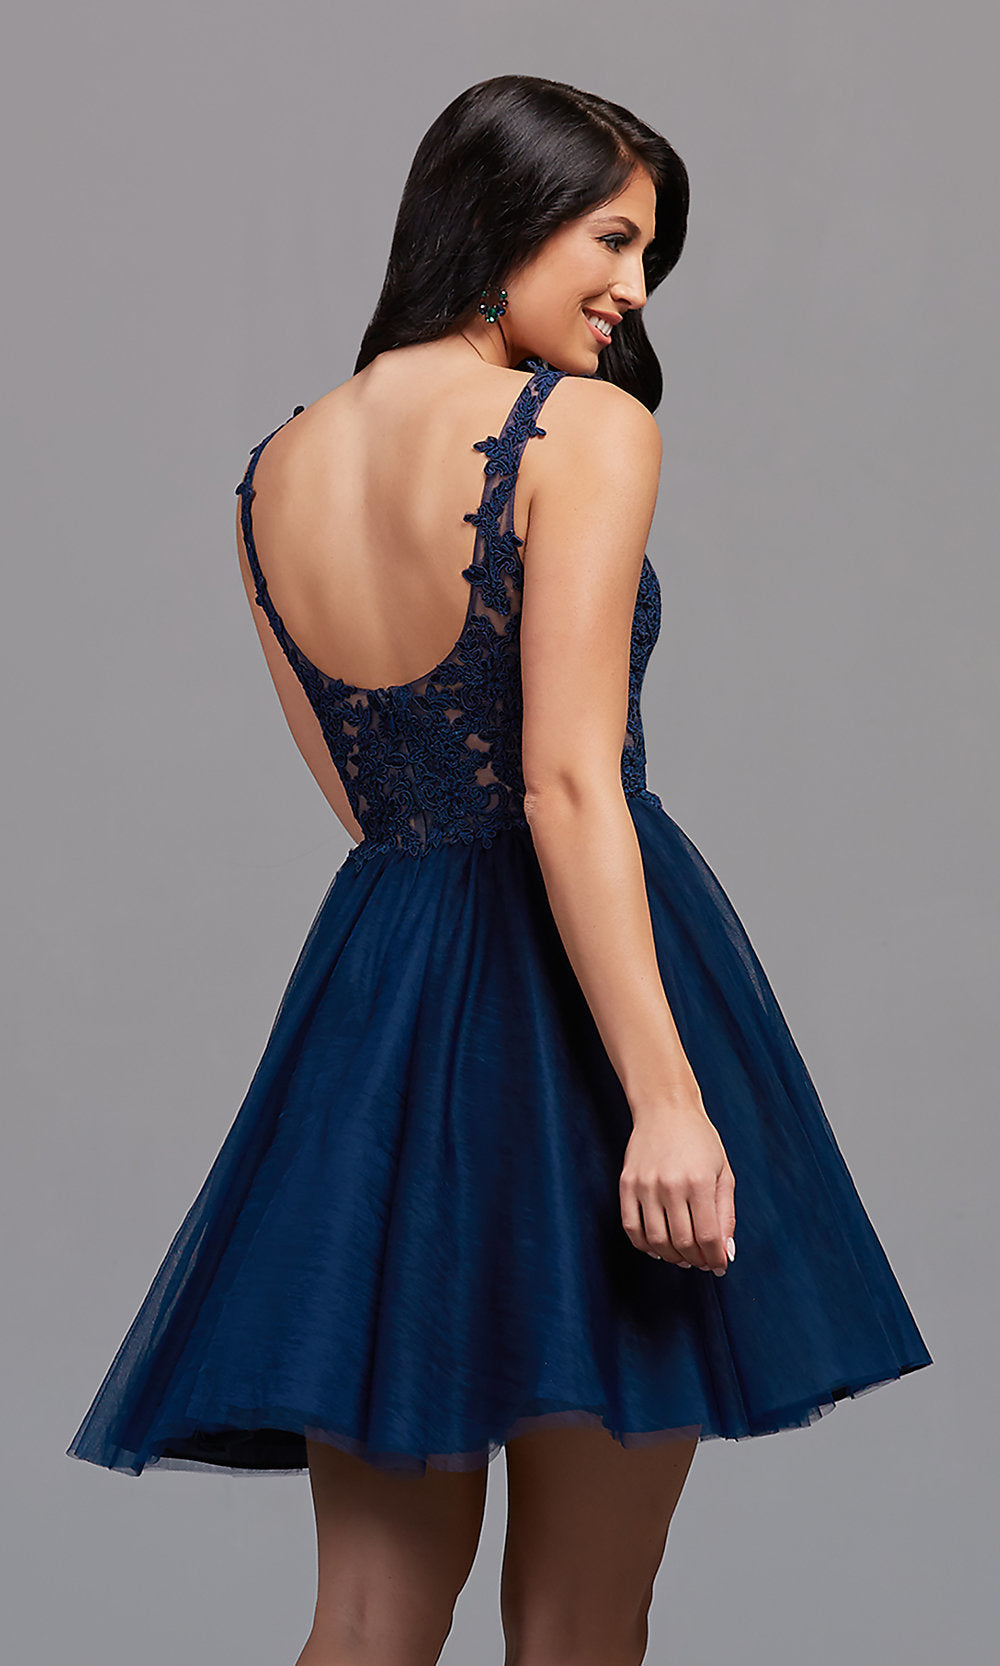  Sheer-Embroidered-Bodice Short Homecoming Dress